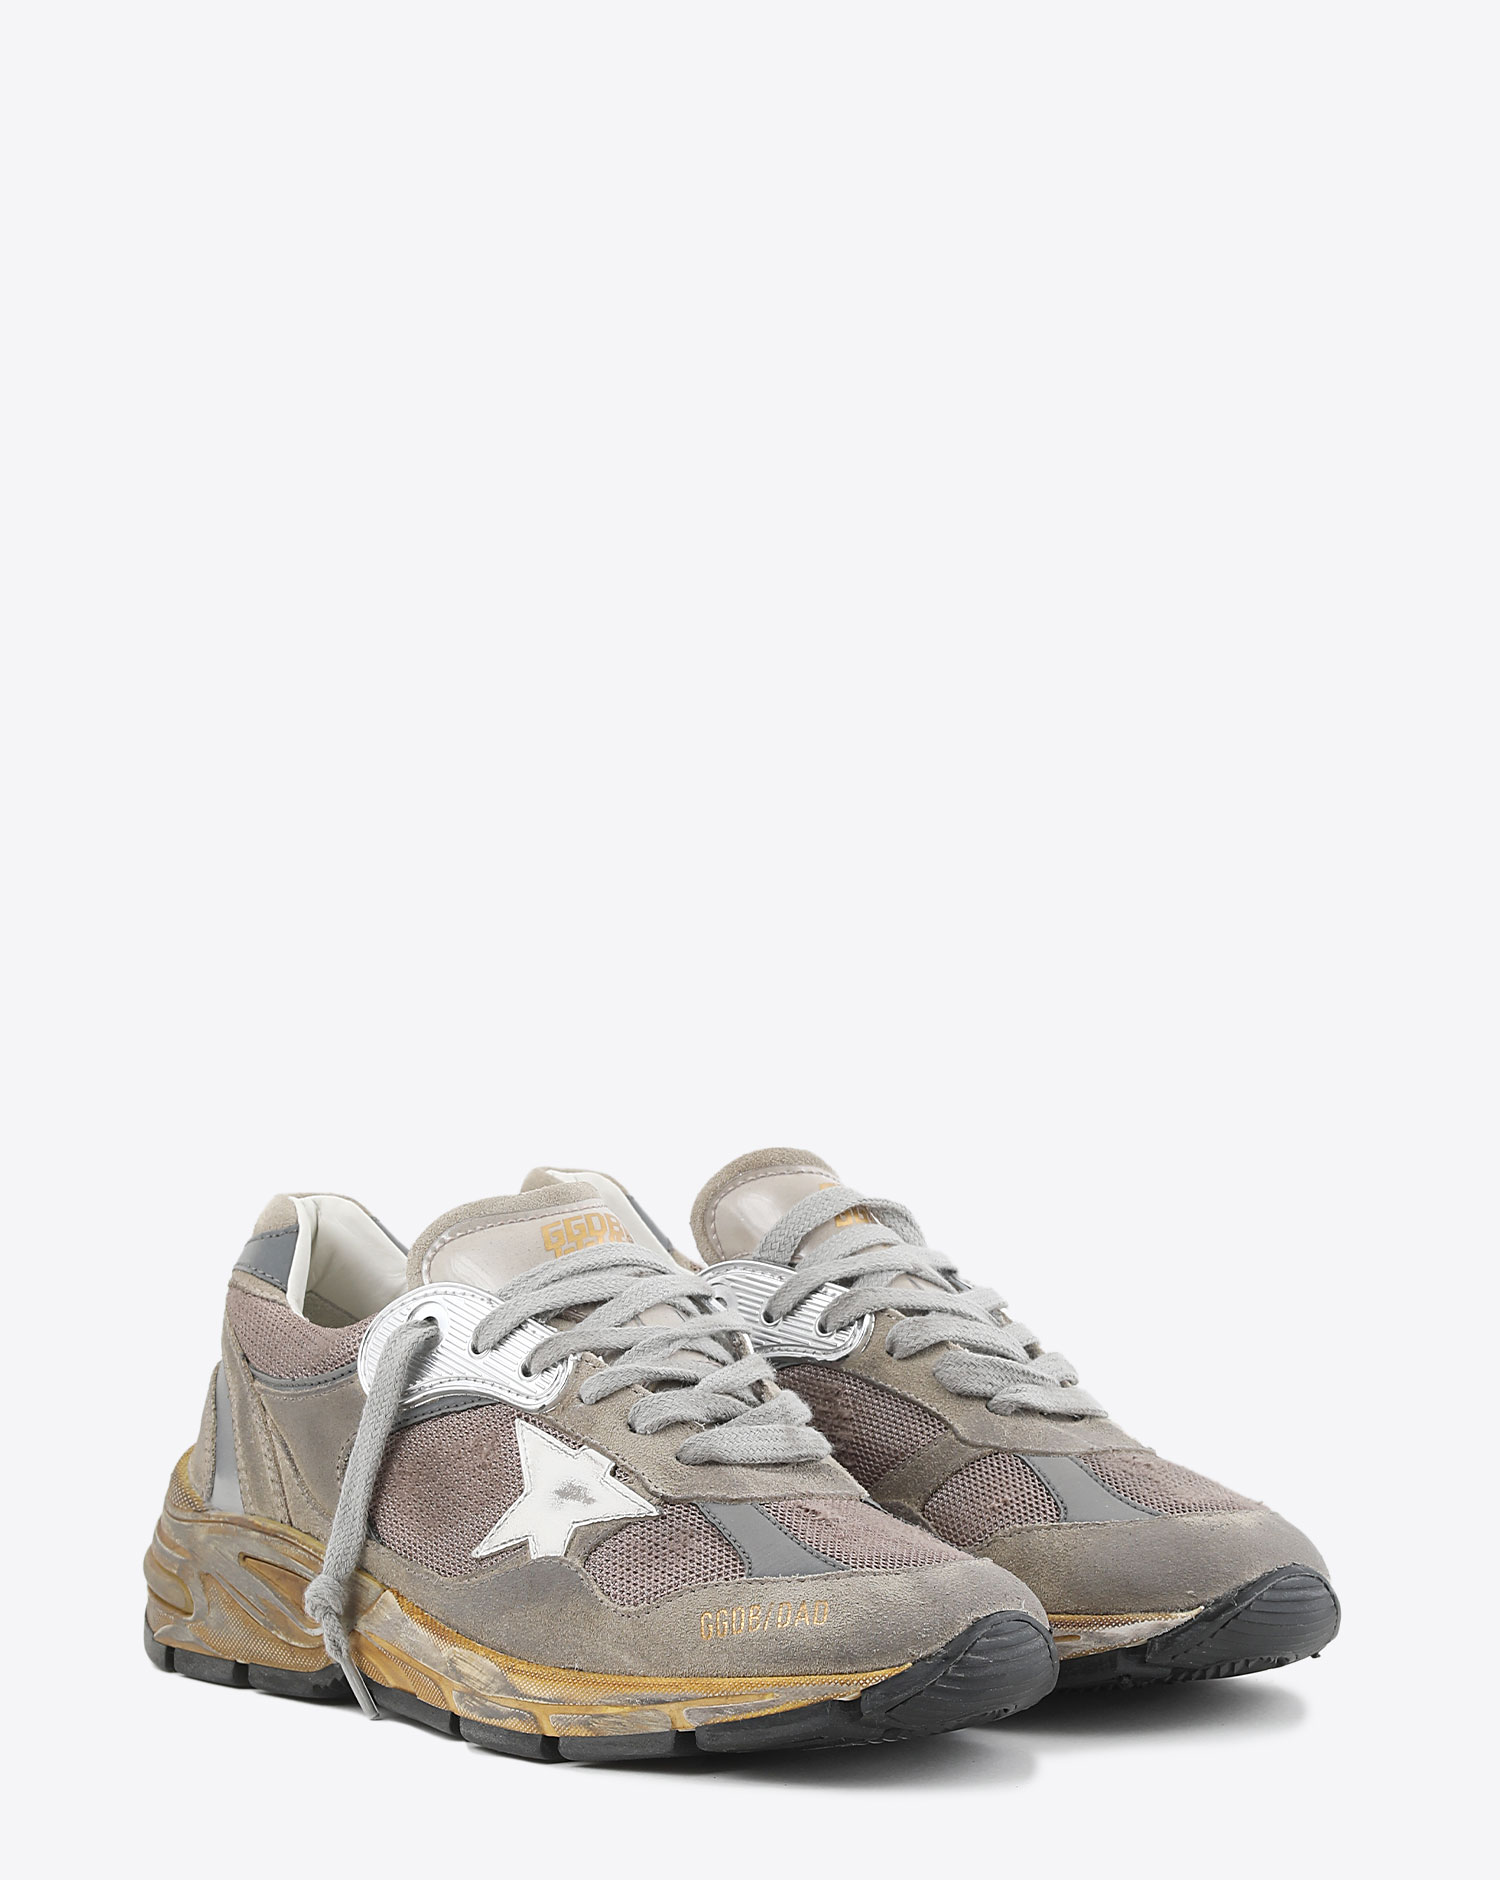 Sneakers Running Dad taupe étoile blanche 81751 Golden Goose Homme. Face.